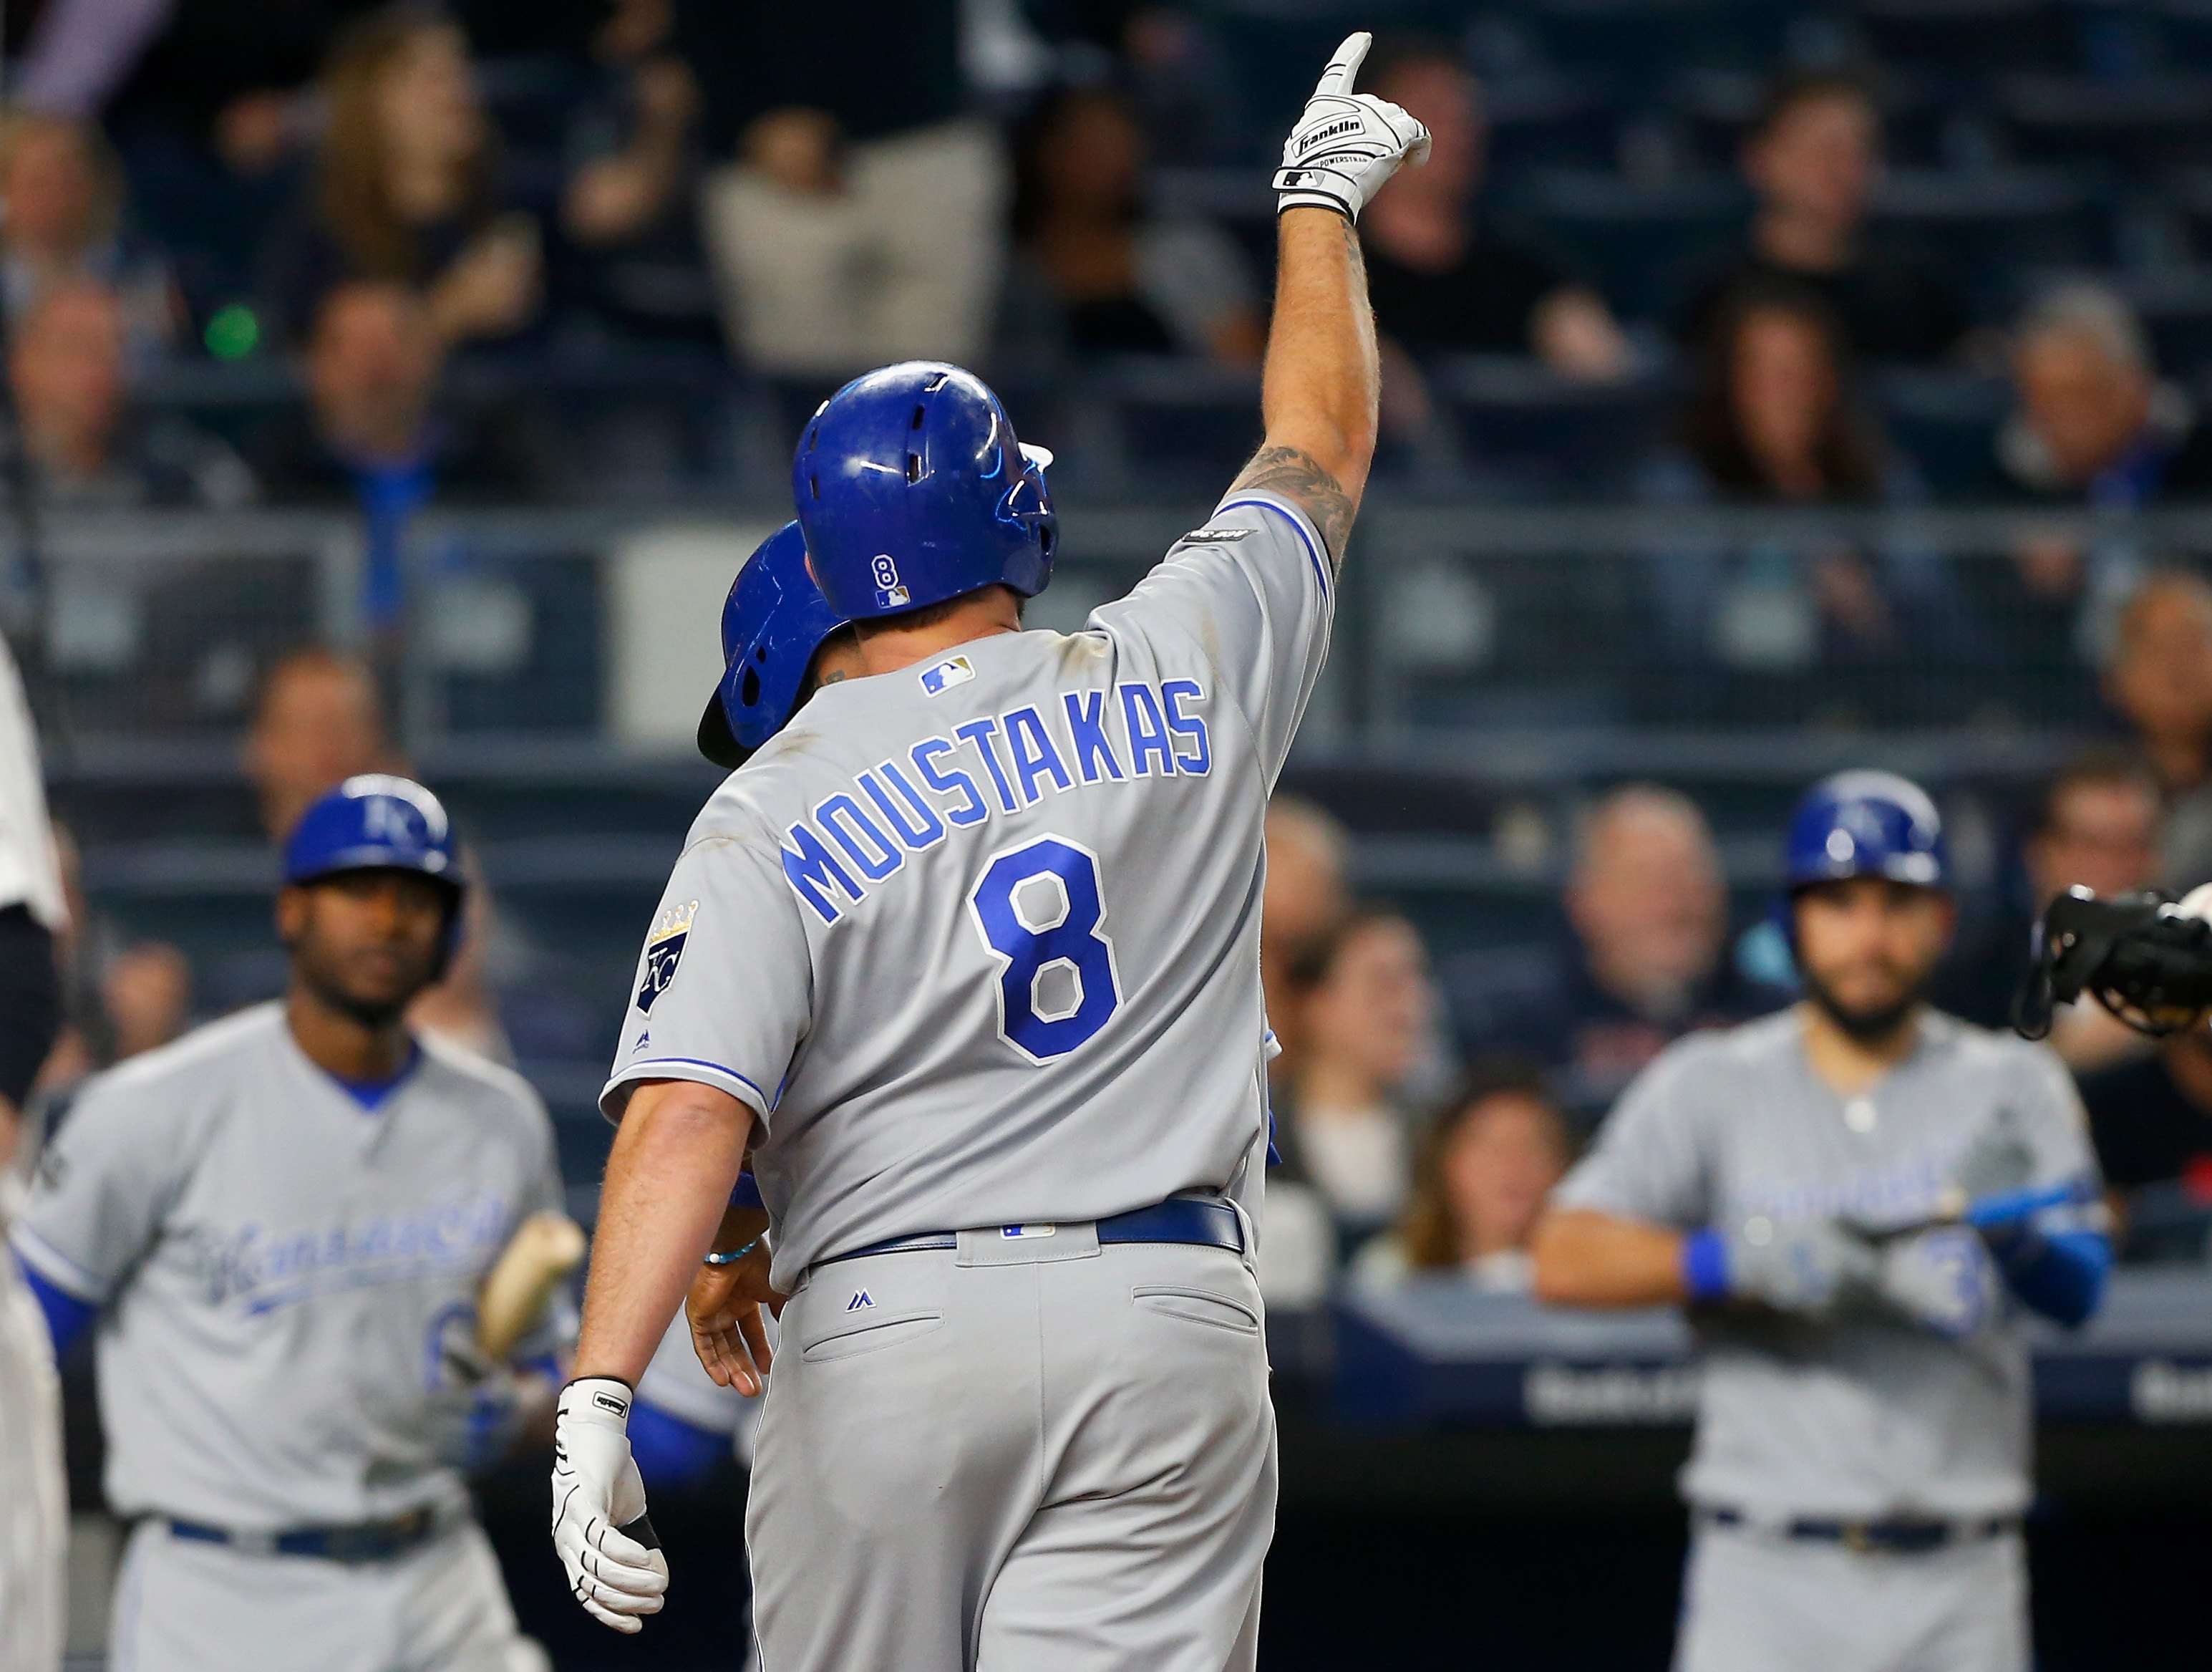 Royals Rumors: Yankees continue to have interest in Mike Moustakas